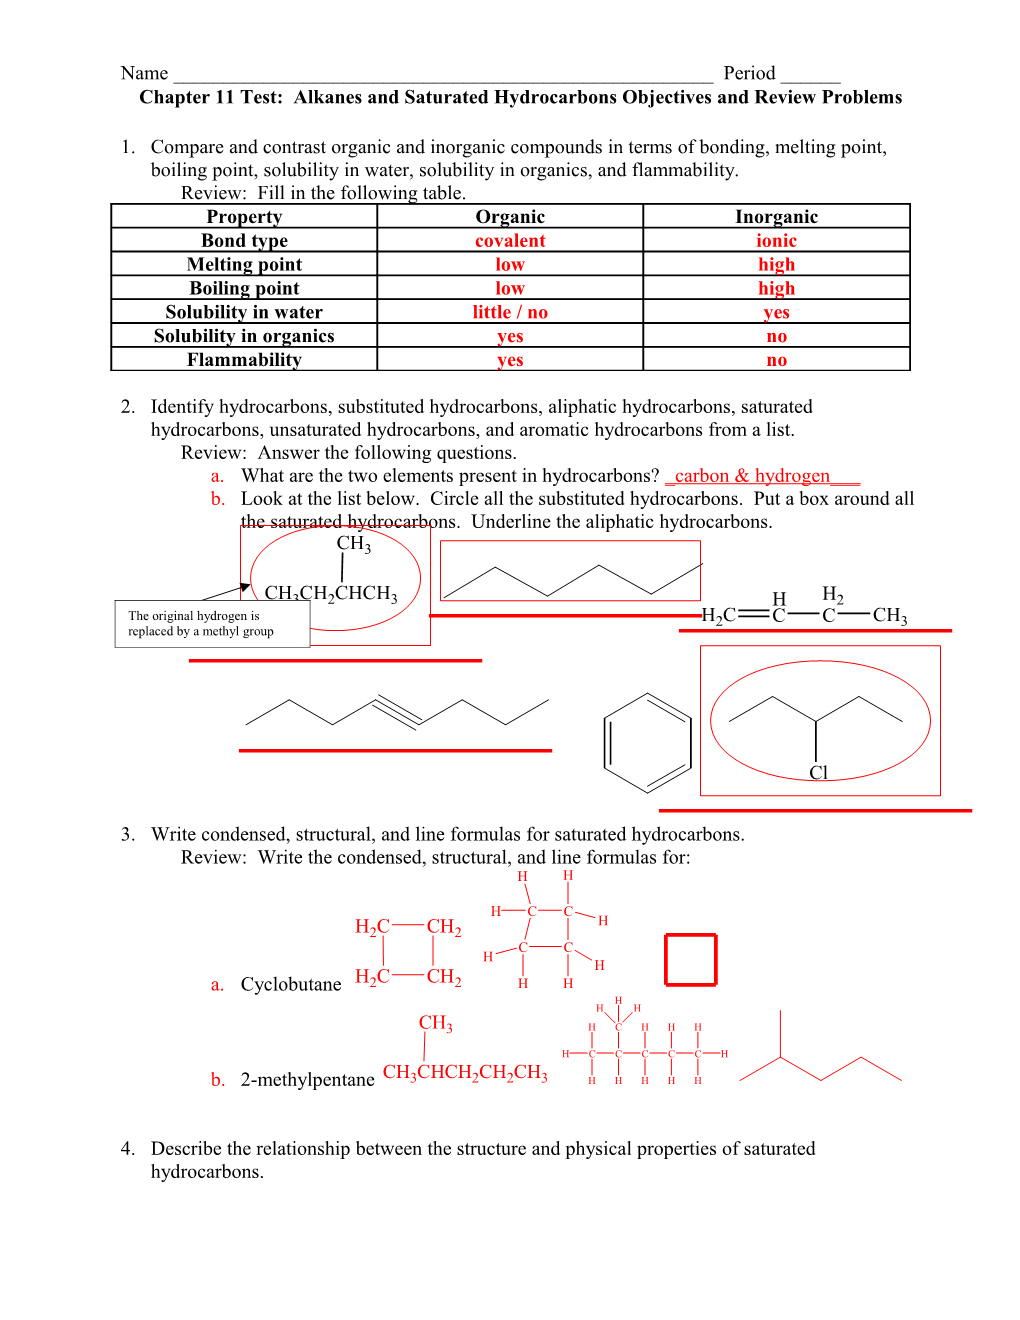 Chapter 11 Test: Alkanes and Saturated Hydrocarbons